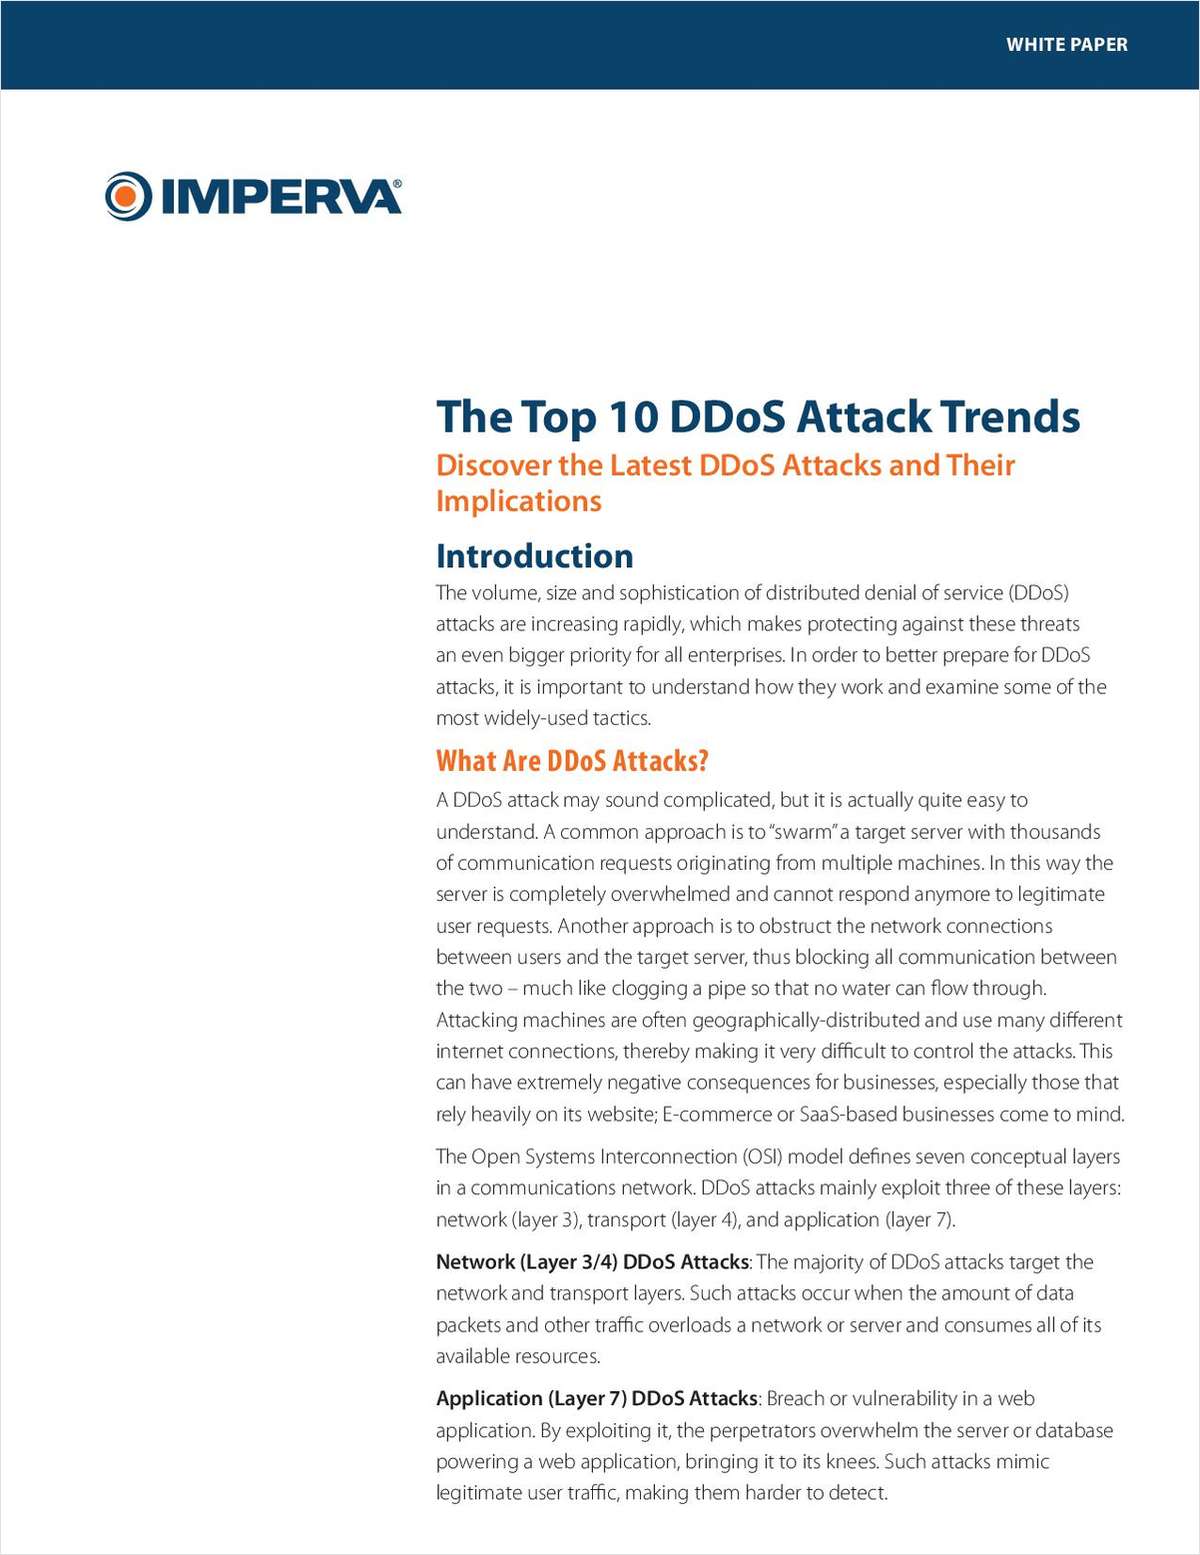 Top 10 DDoS Attack Trends